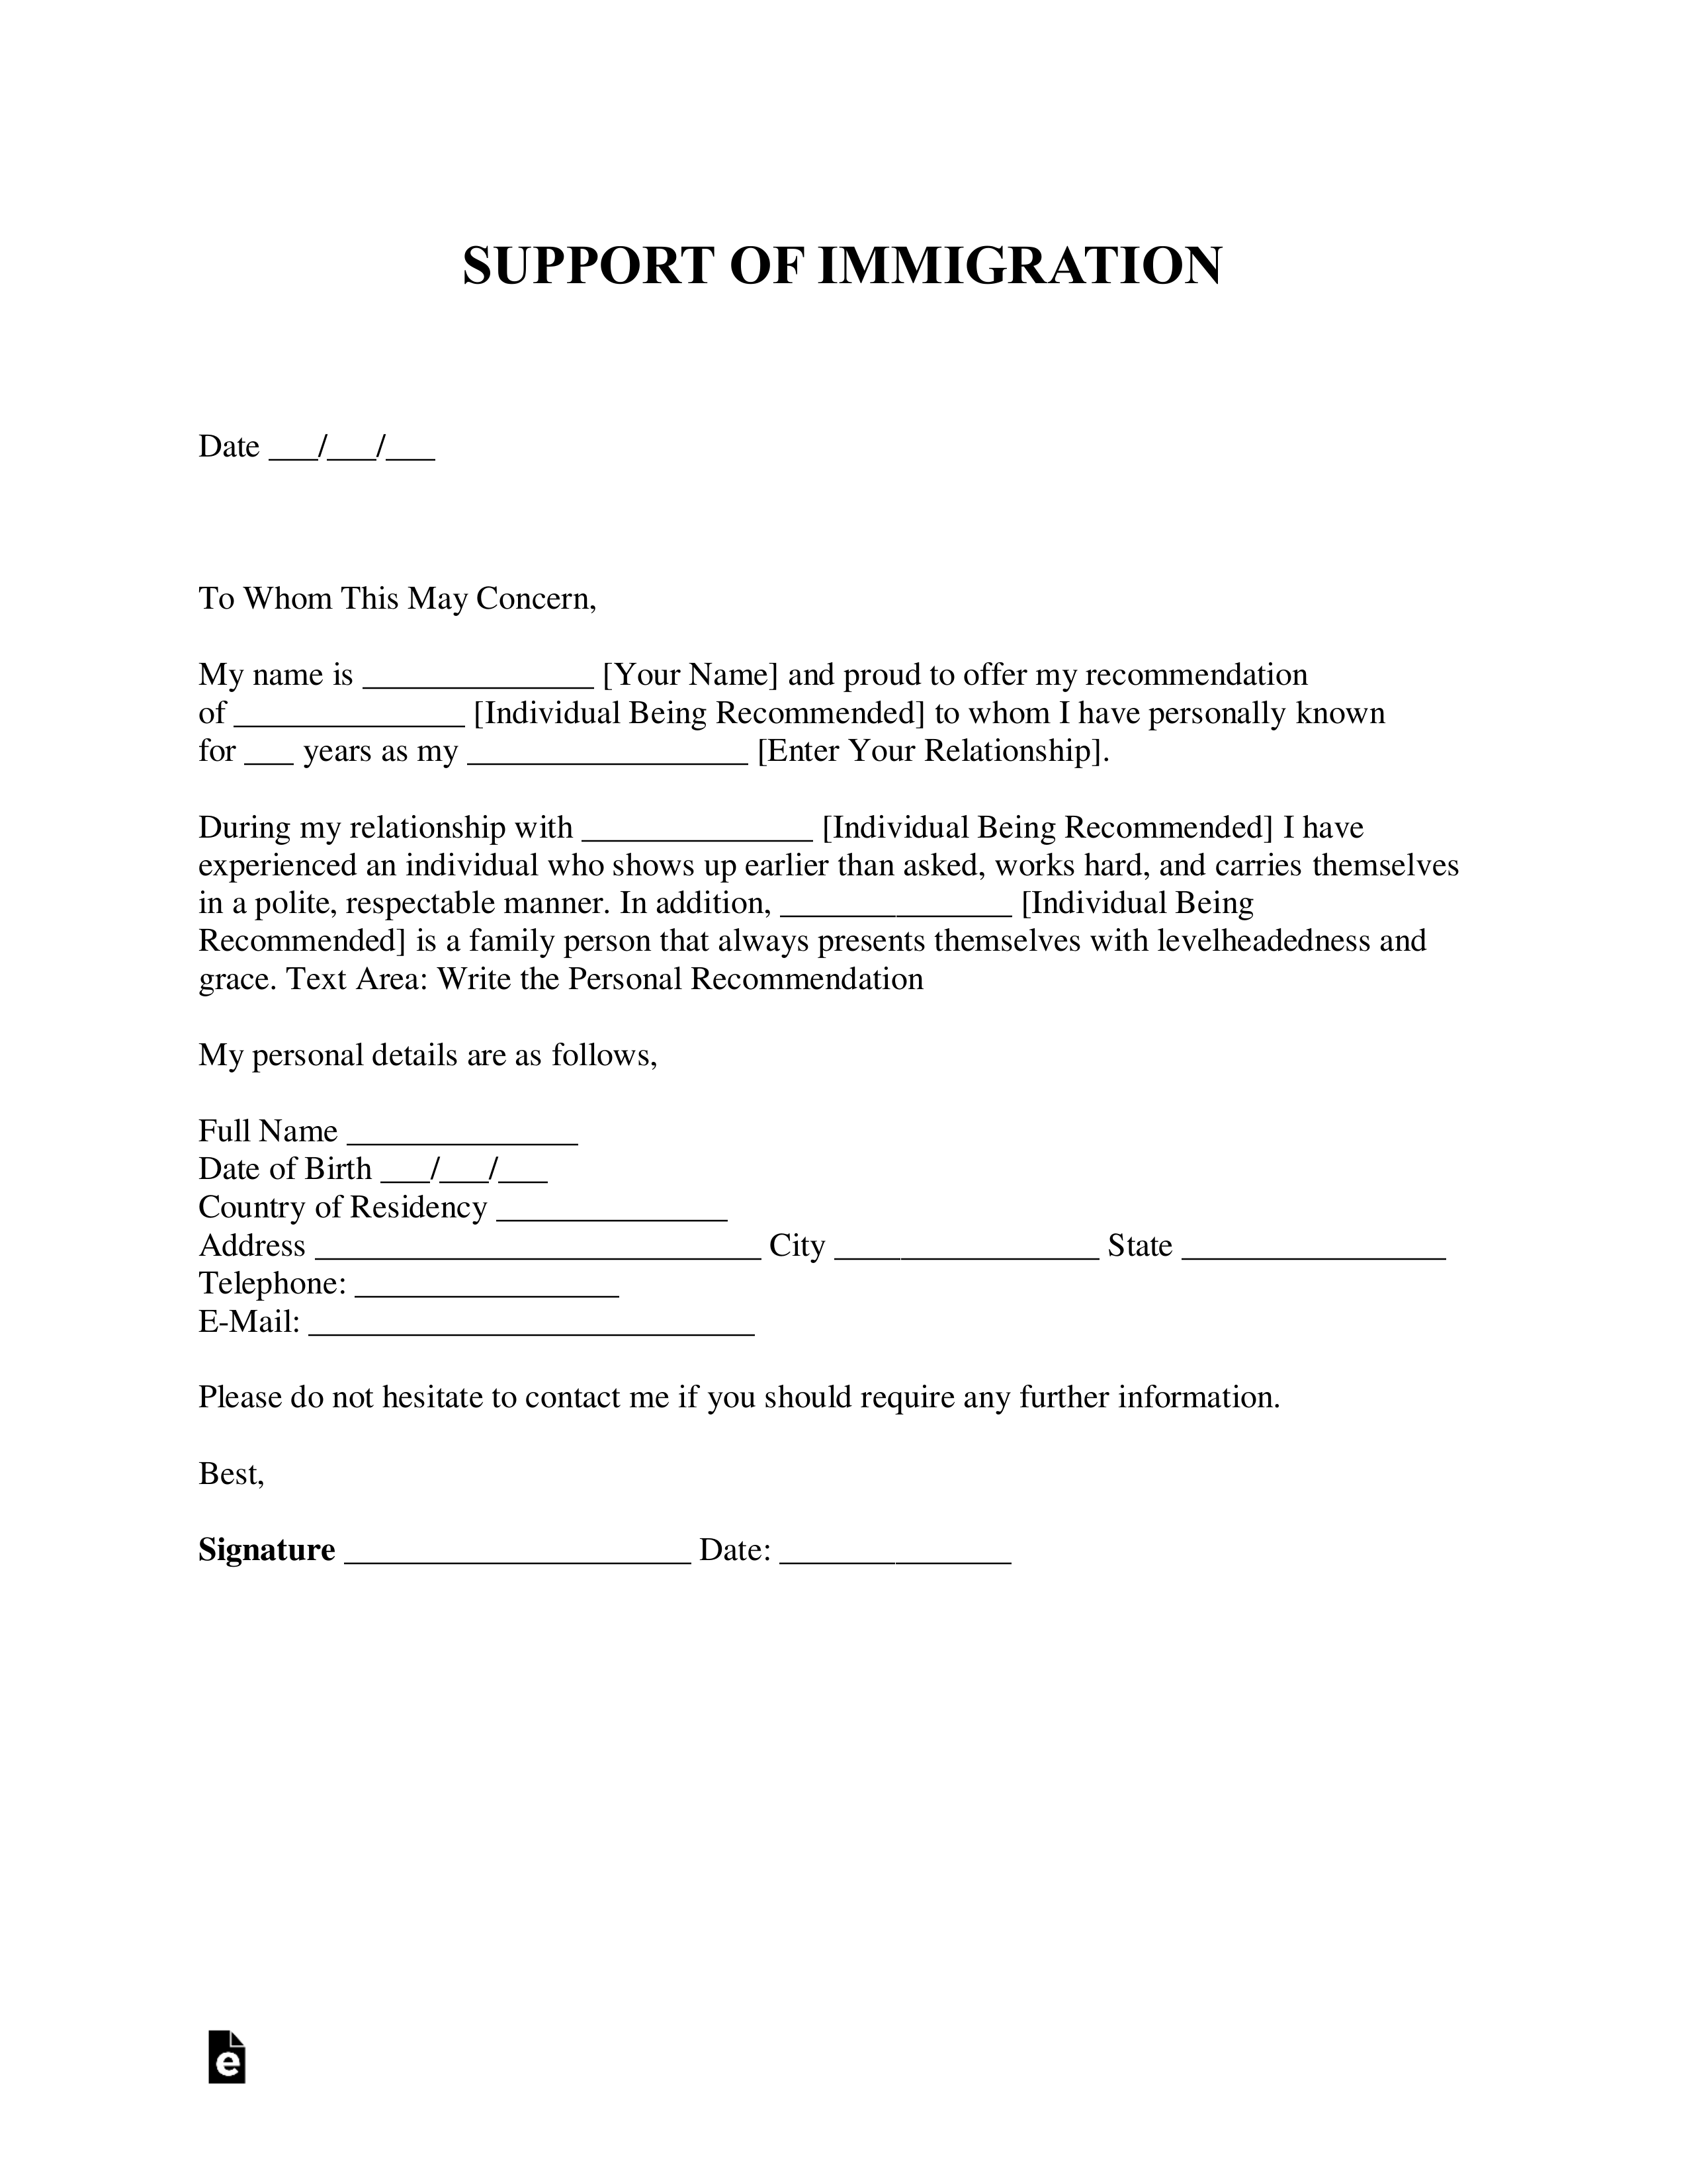 Immigration Letter For A Couple from eforms.com